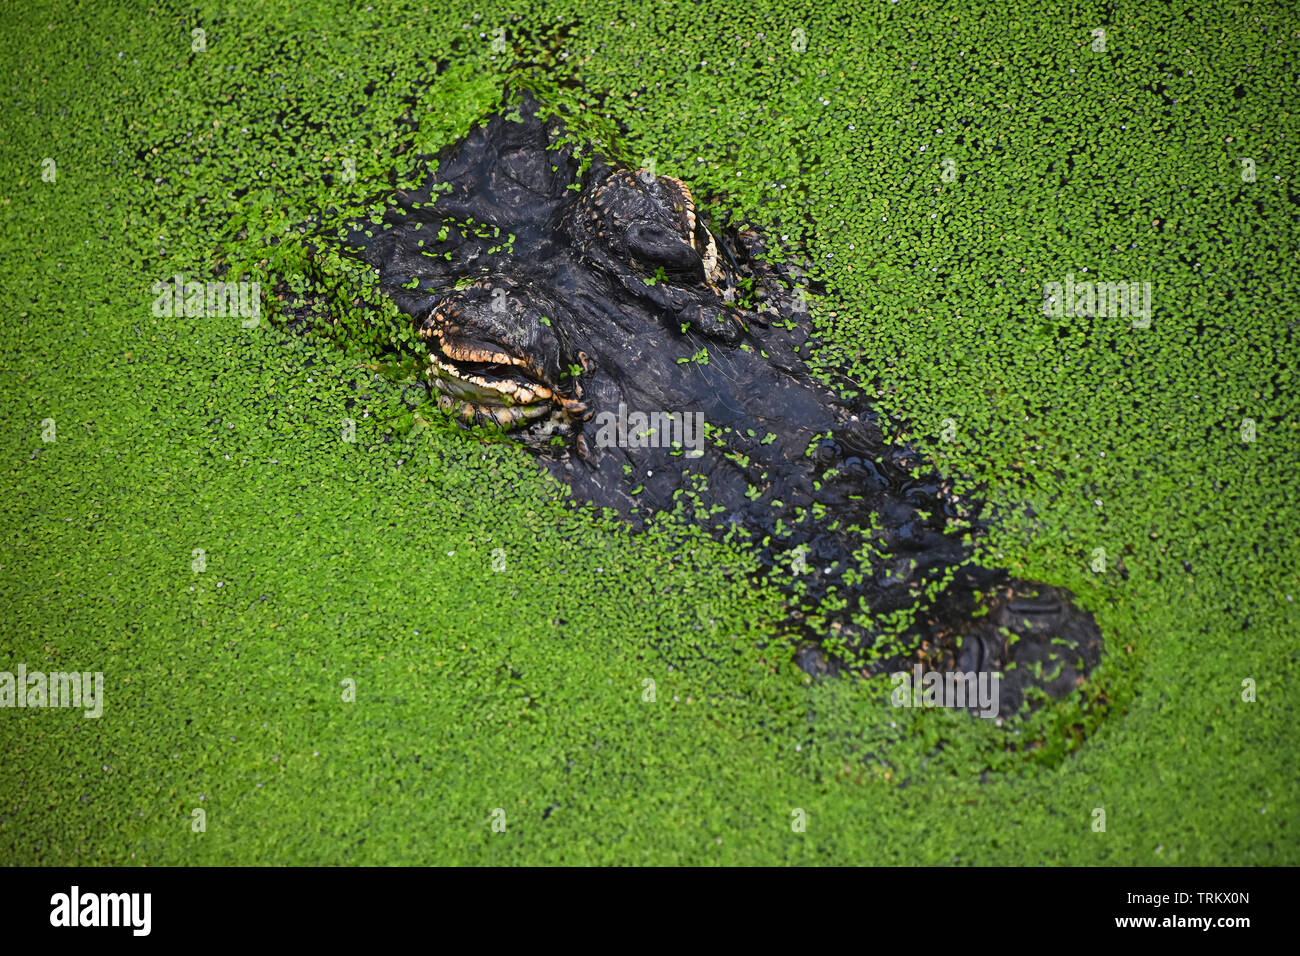 Close up portrait of alligator crocodile looking out of green duckweed hiding in water ambush, elevated top view Stock Photo